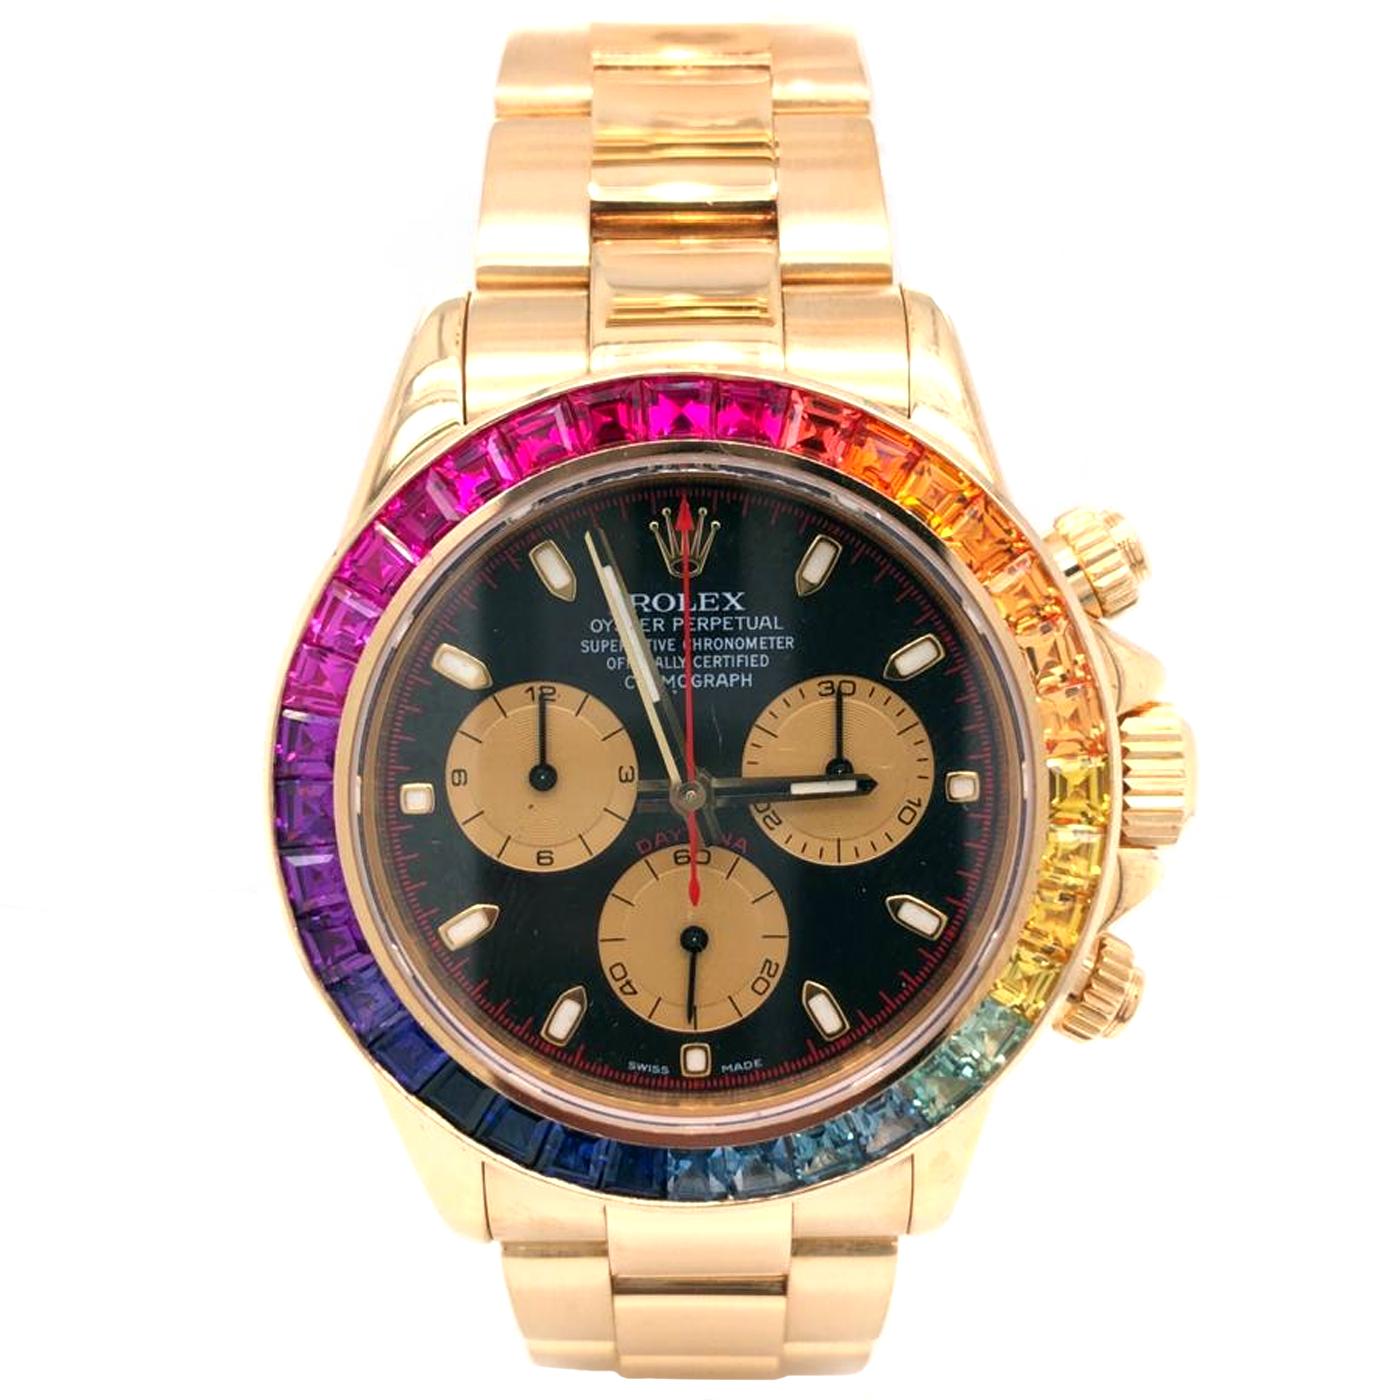 Rolex Daytona Yellow Gold Custom Bezel and Black Dial Automatic Watch 116528. The bezel is 14k Gold. This Beautiful Timepiece is Powered by an Automatic Movement that Features: 18k Yellow Gold Bracelet, 18k Gold Bezel with Rainbow Bezel, Black Dial.